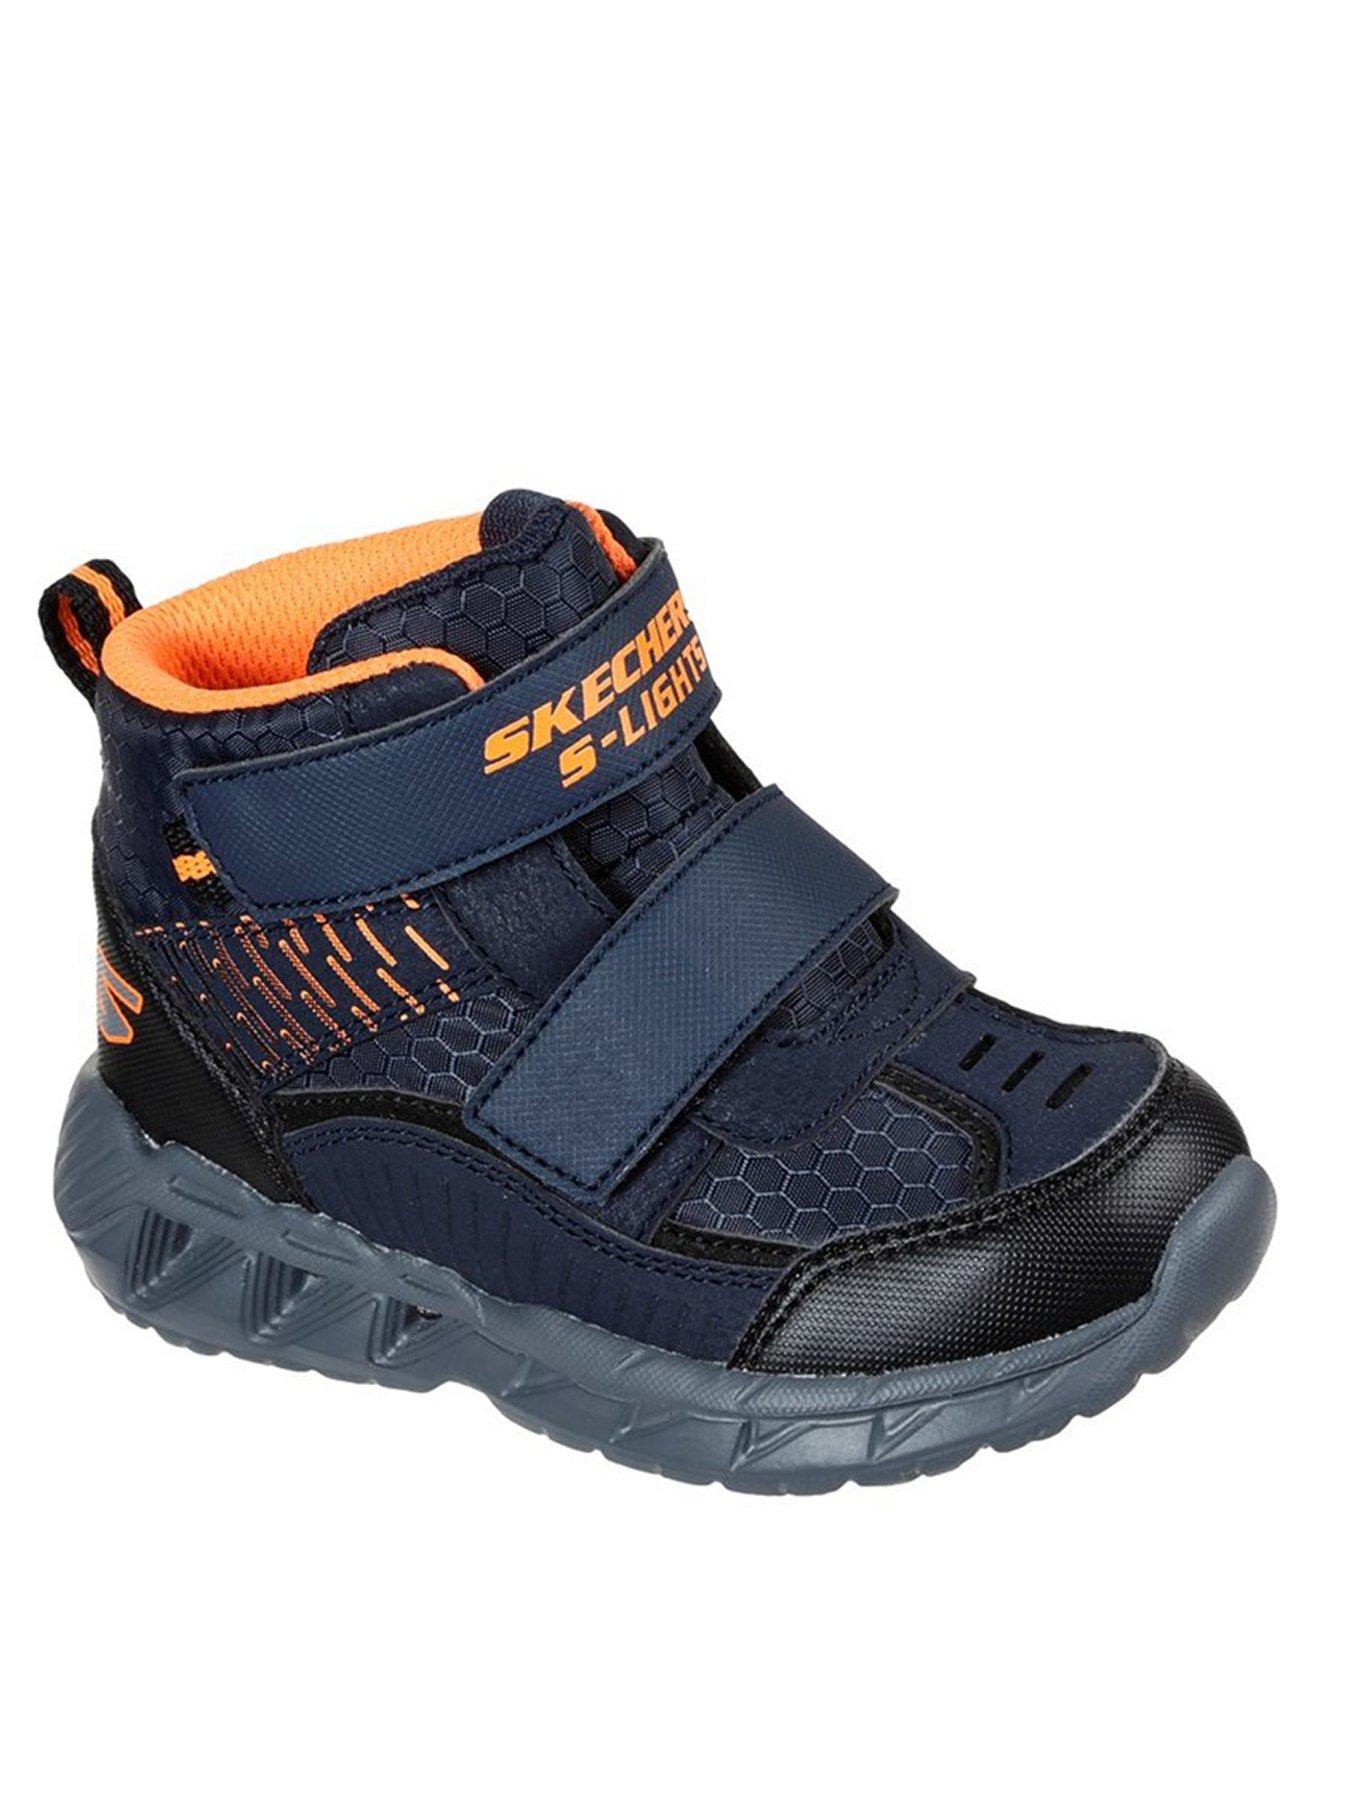 Shoes & boots Magna-lights Boots - Navy